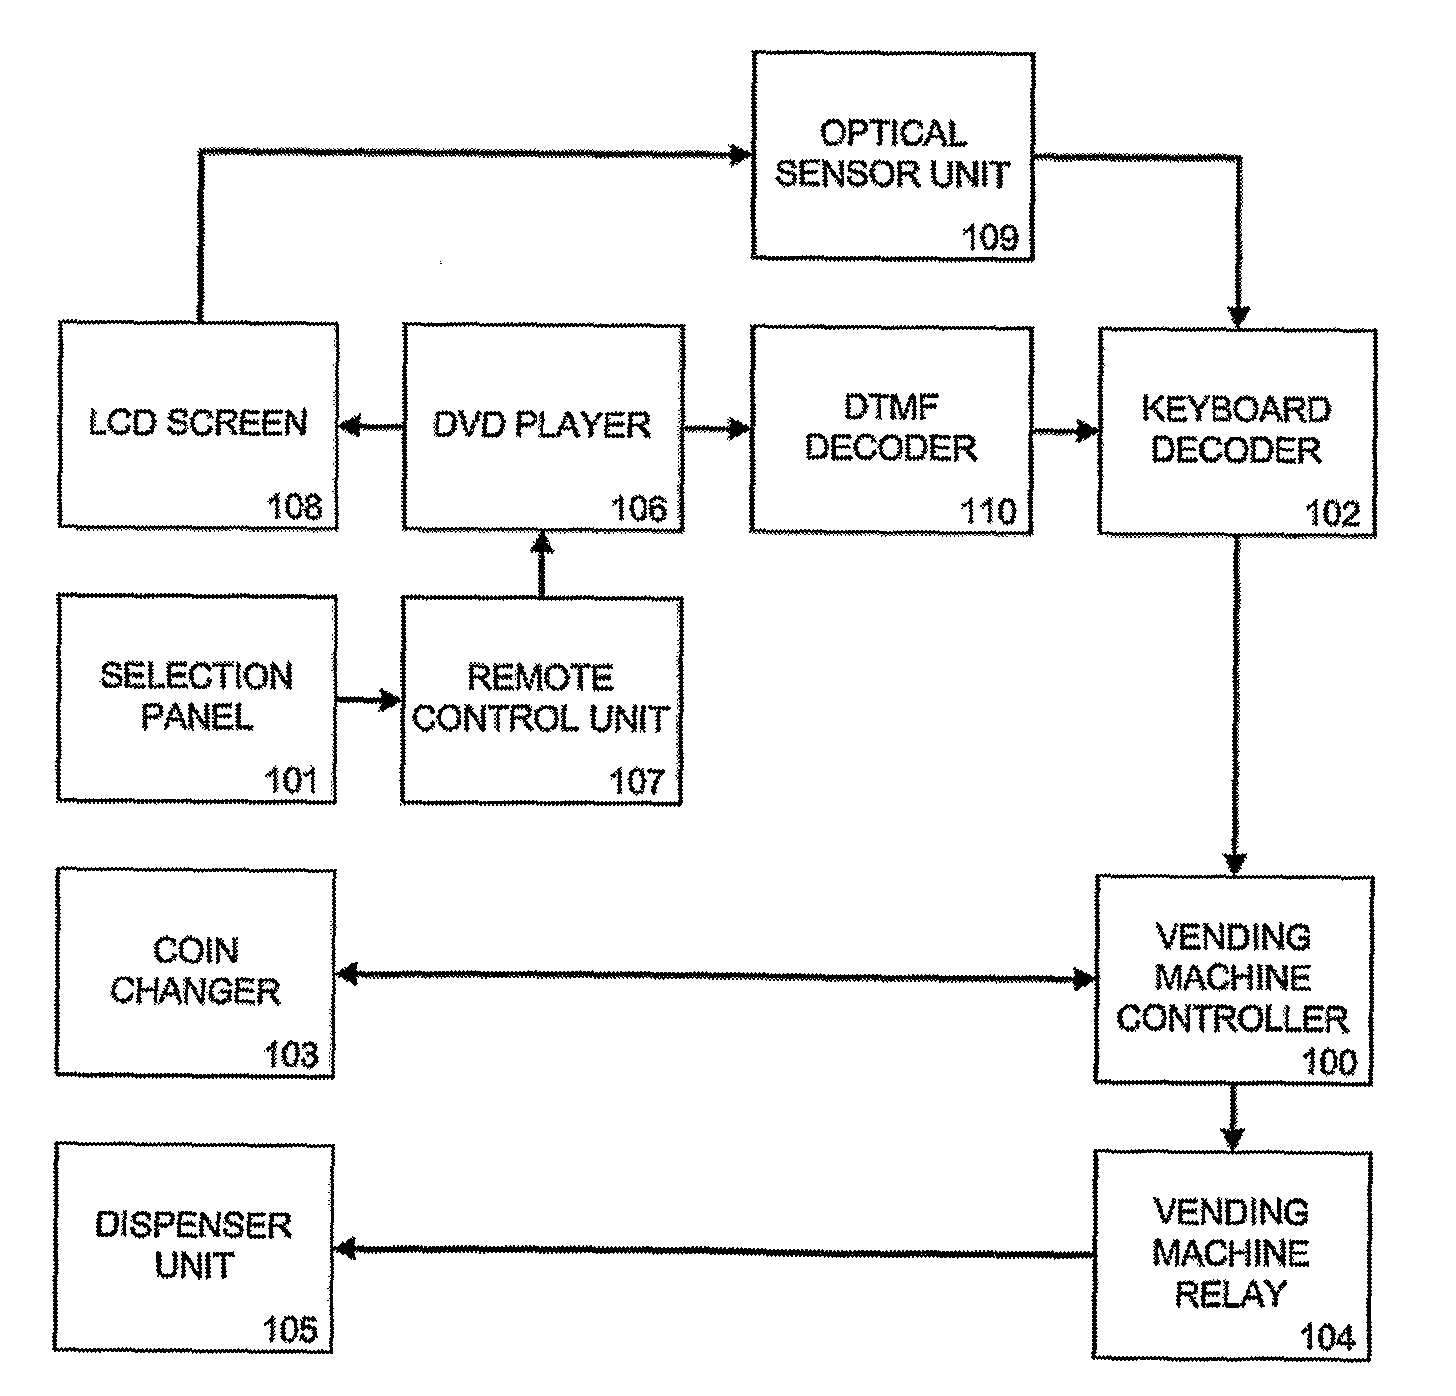 Method and Apparatus for Controlling a Vending Machine